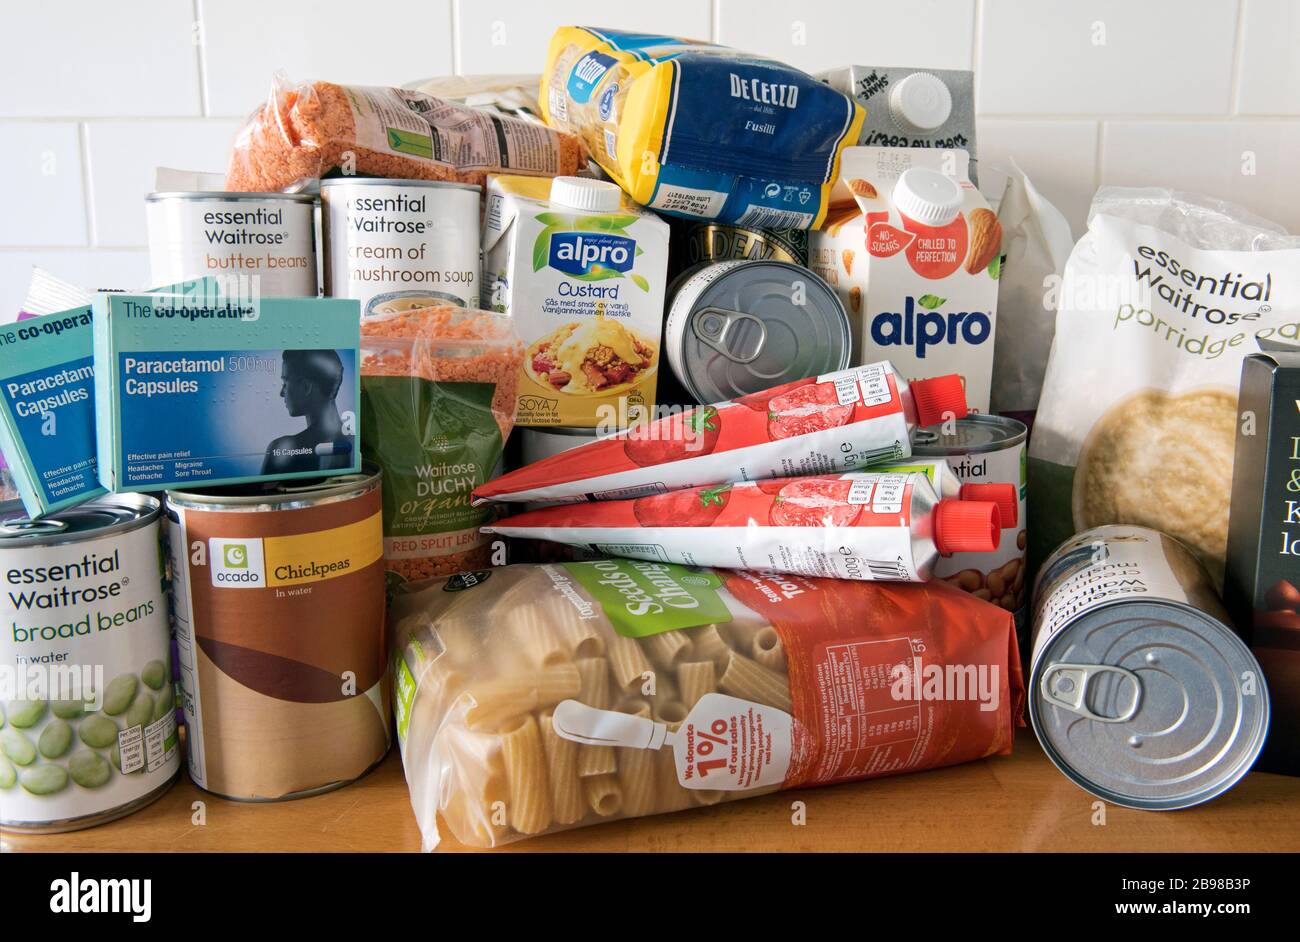 Tins and packets of dried food piled up on kitchen work surface after home delivery.  Stockpiling due to Coronavirus pandemic. Stock Photo